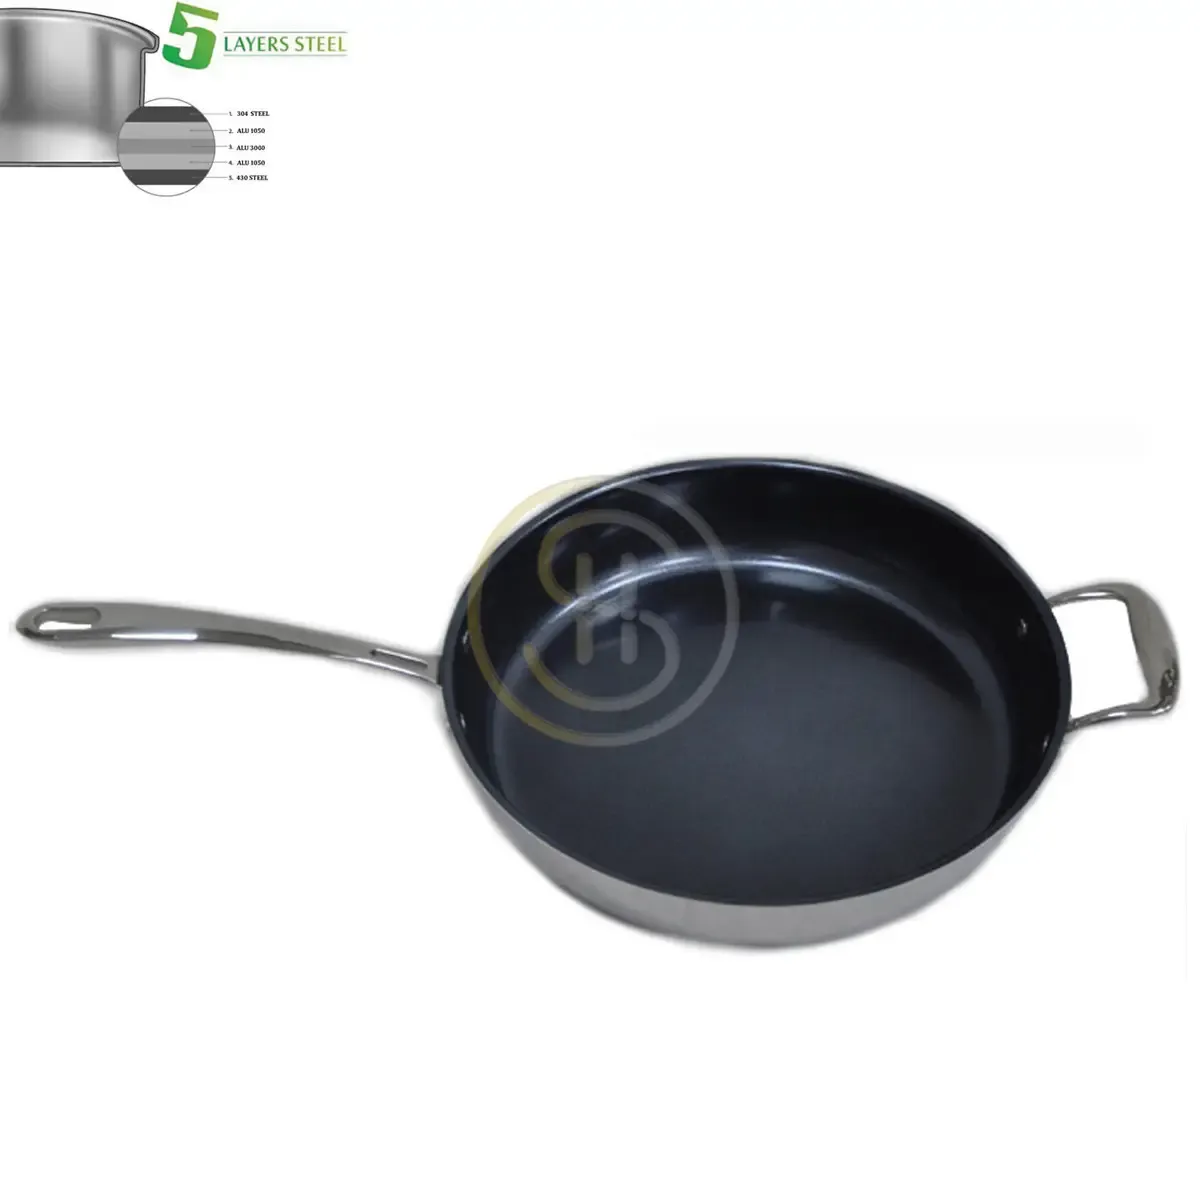 5Ply All Clad Steel Body Induction frypan